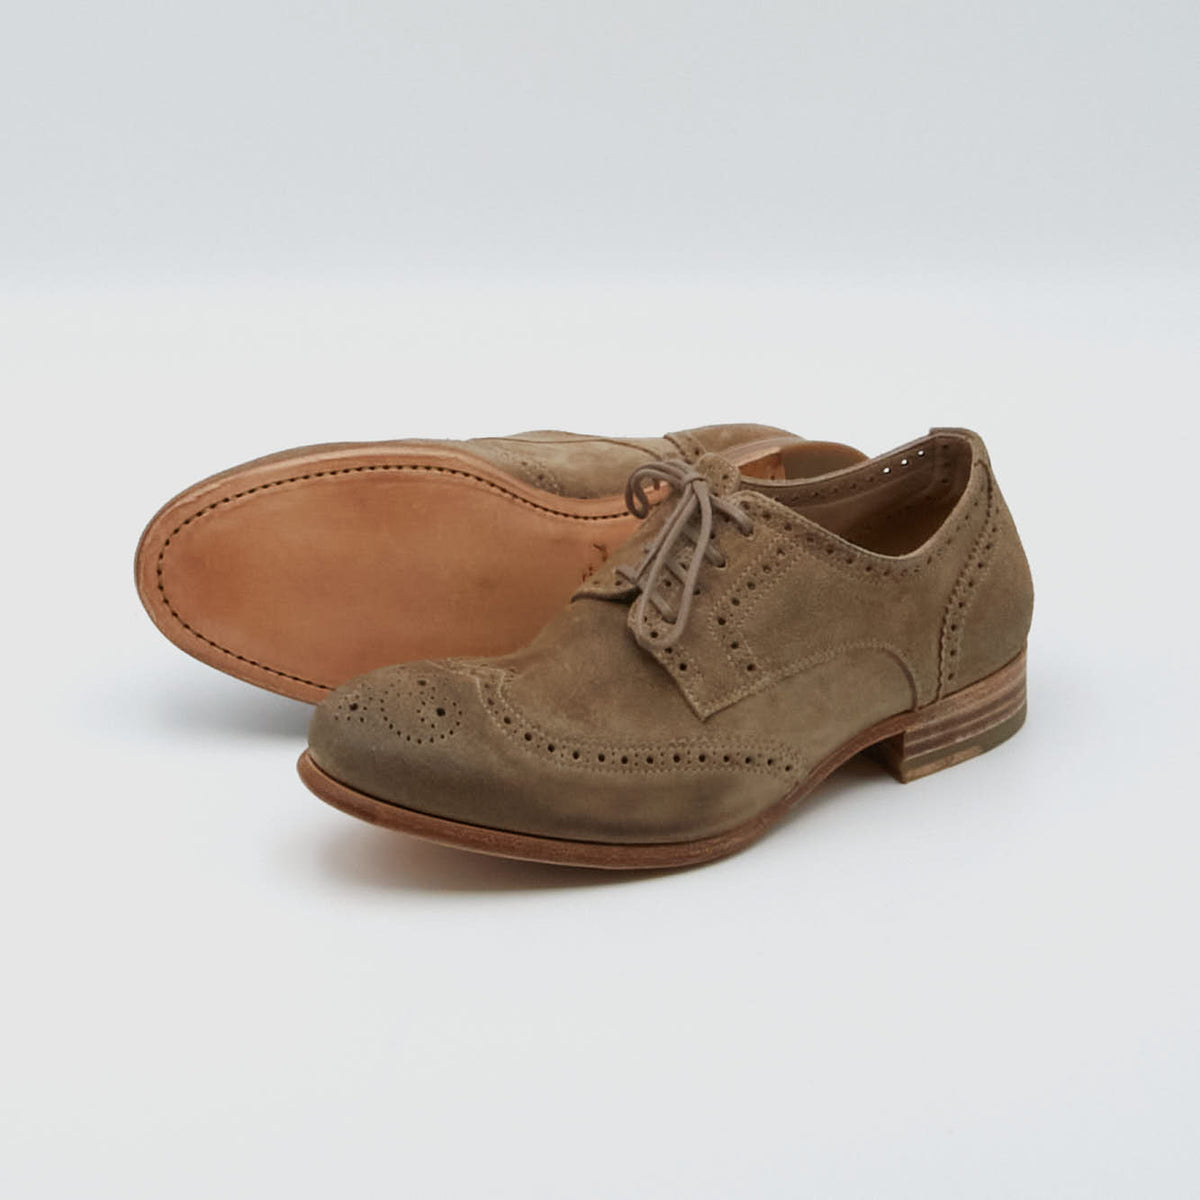 n.d.c. made by hand Ladies Suede  Brogues Shoes